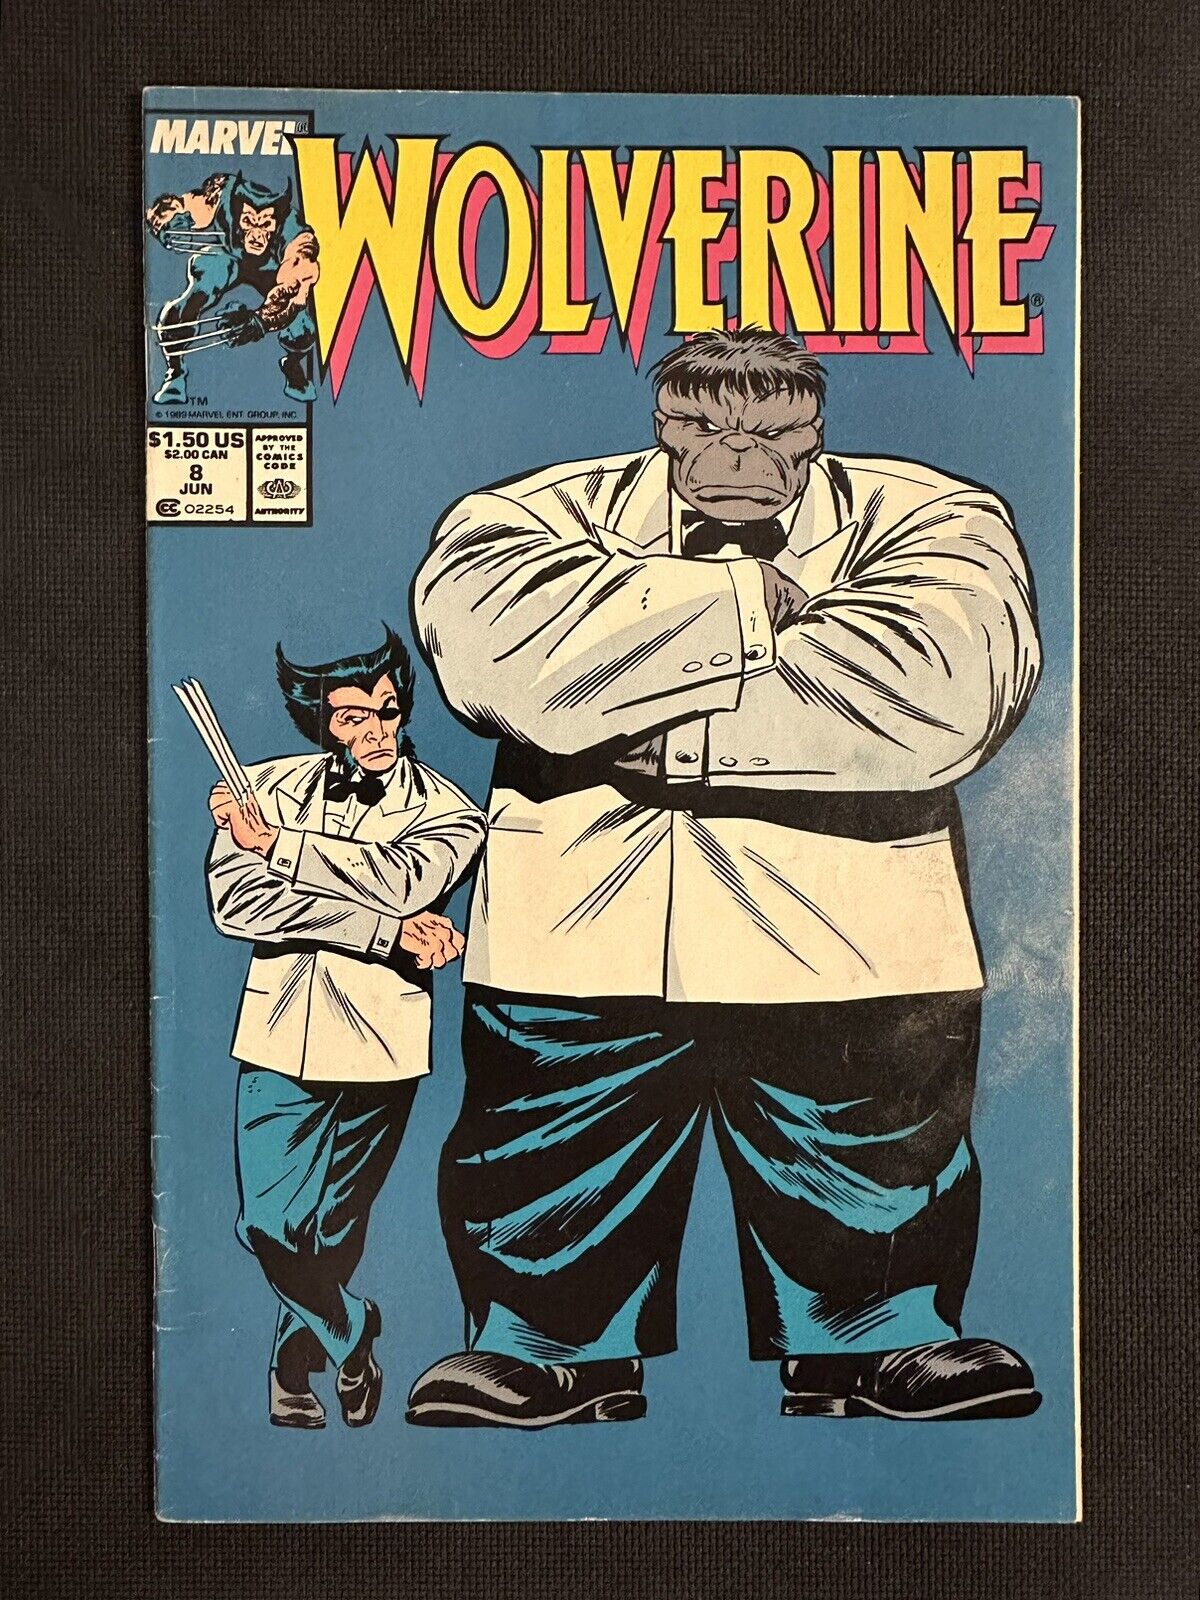 Wolverine #8 - Marvel 1989 Key Issue Iconic Patch/Mr Fixit Cover - VG